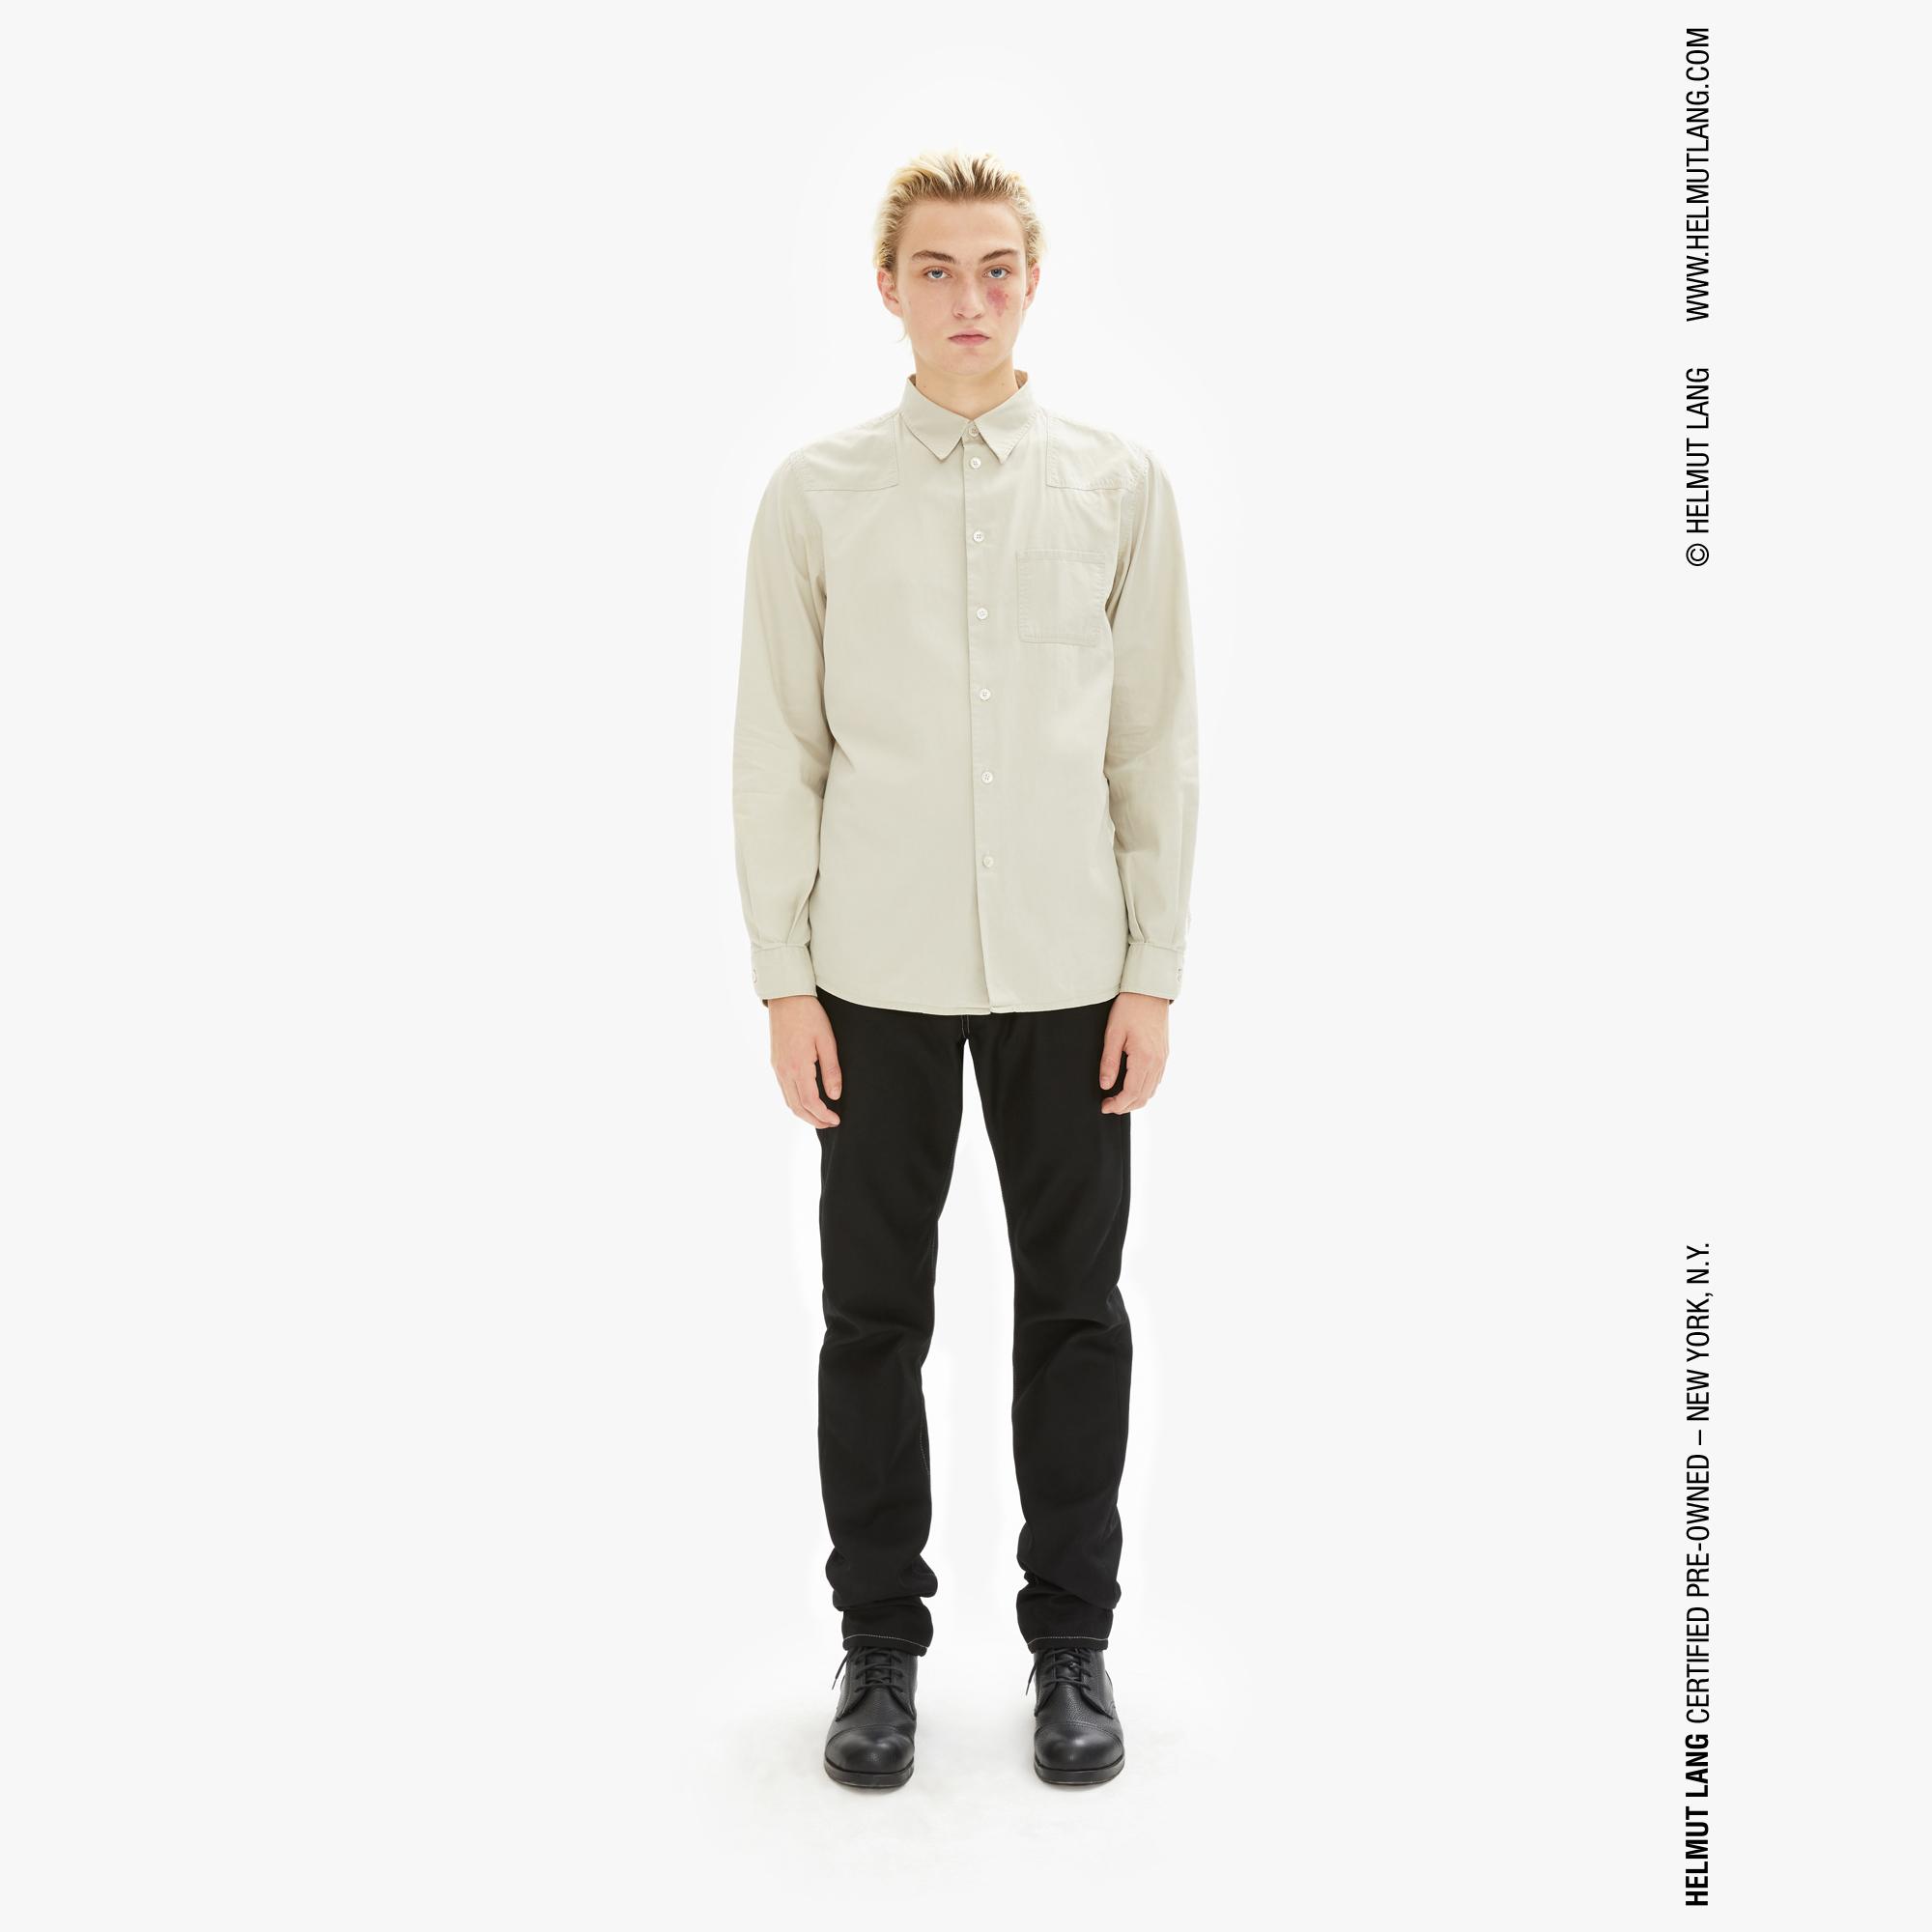 Helmut Lang Tan Workwear Shirt With Patches Www Helmutlang Com